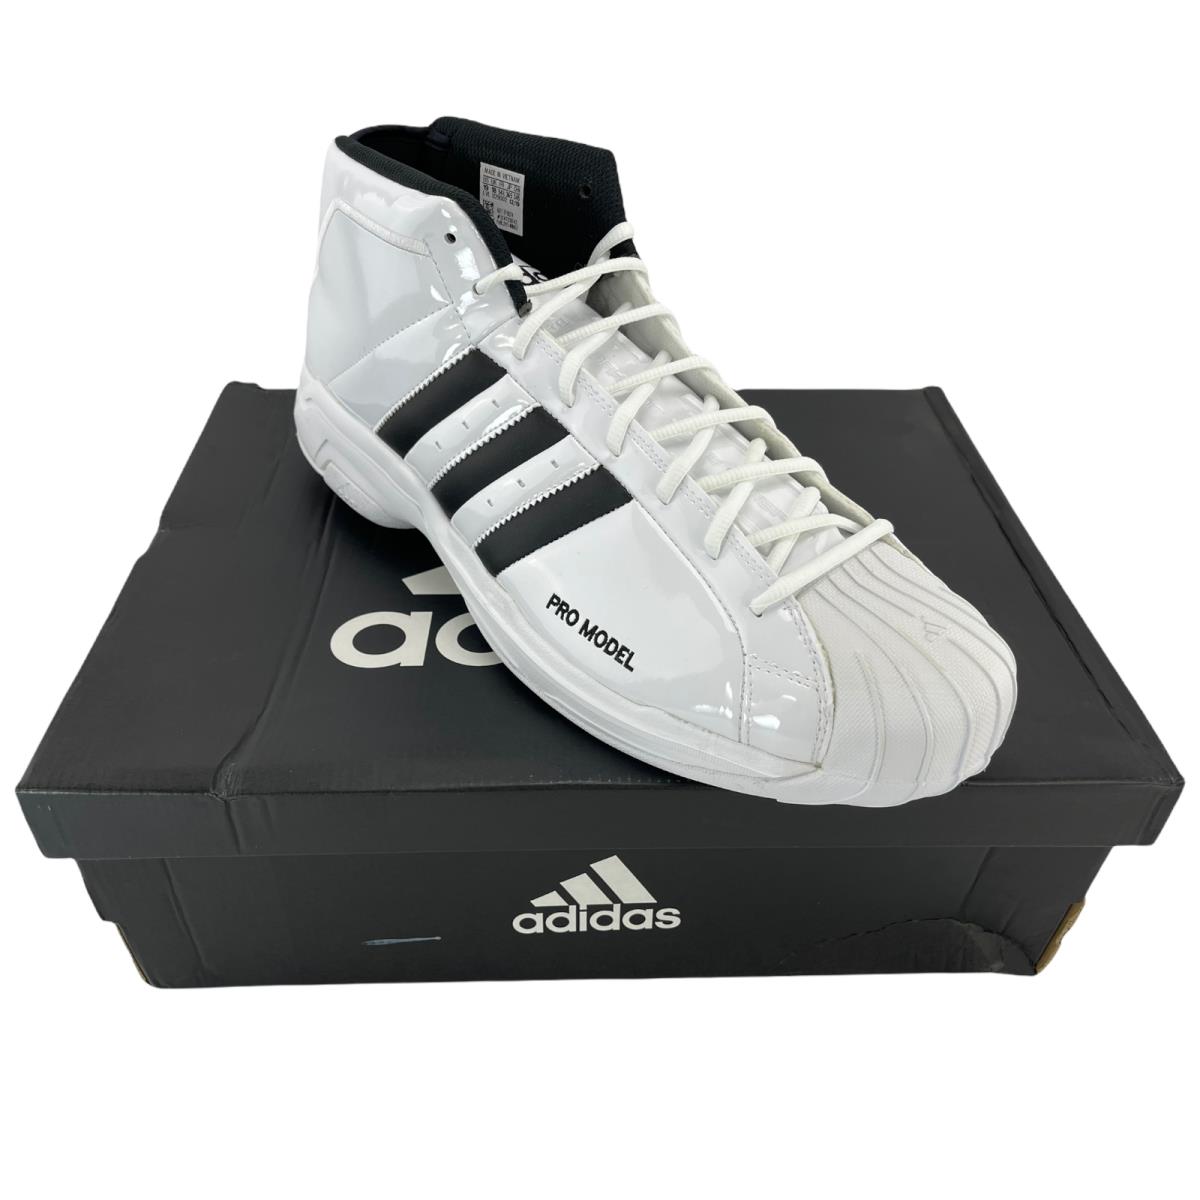 Adidas Pro Model 2G Men White High Top Lace Up Basketball Shoes Sneakers Size 19